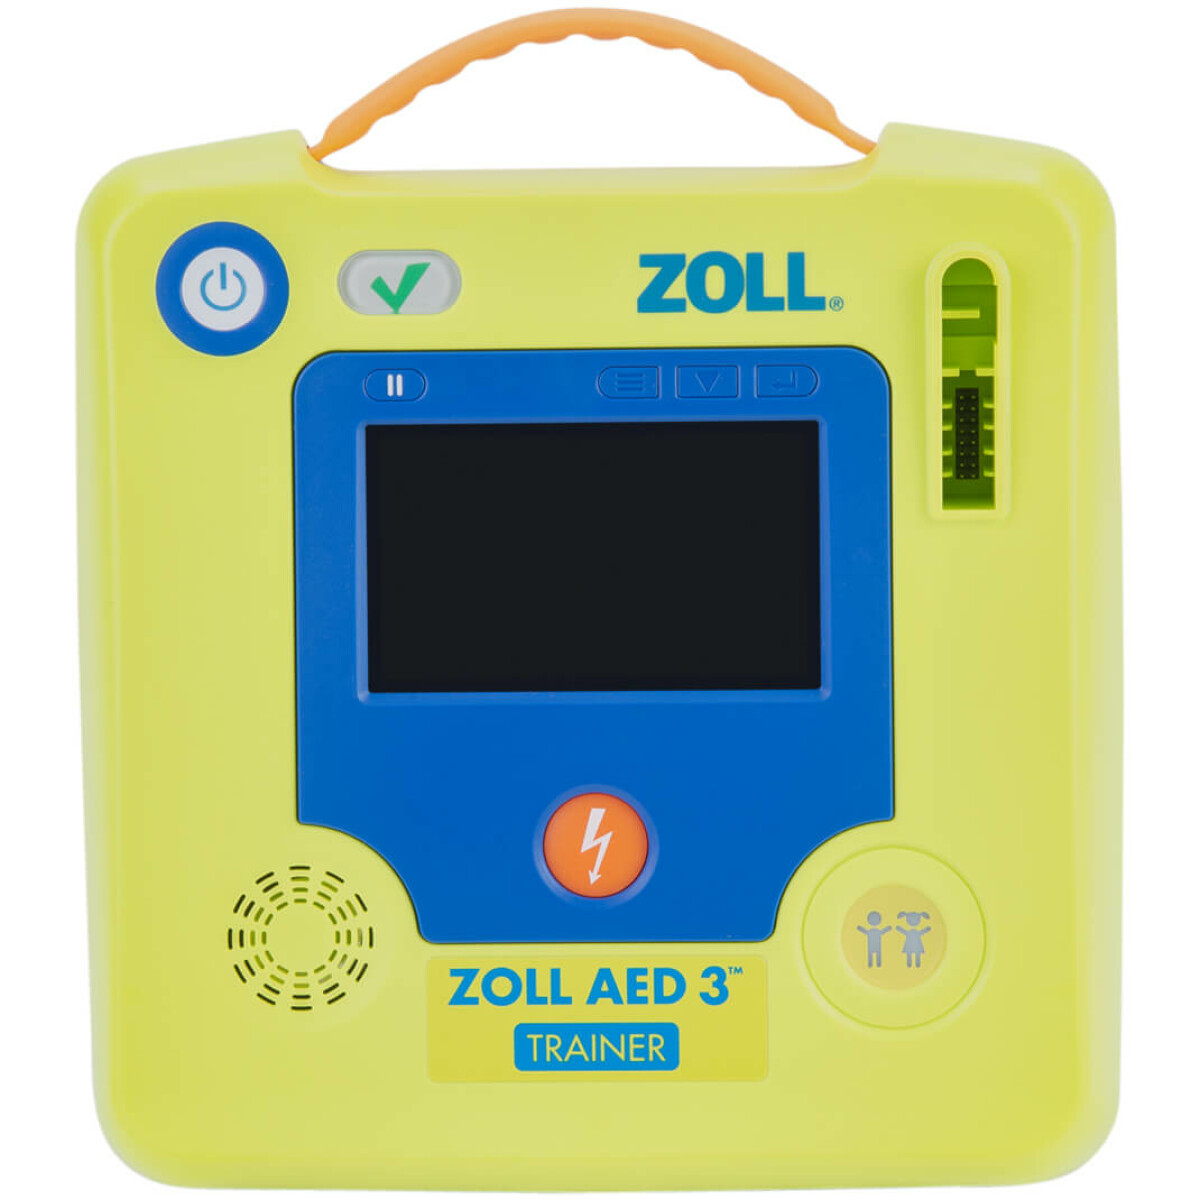 ZOLL AED 3 trainer